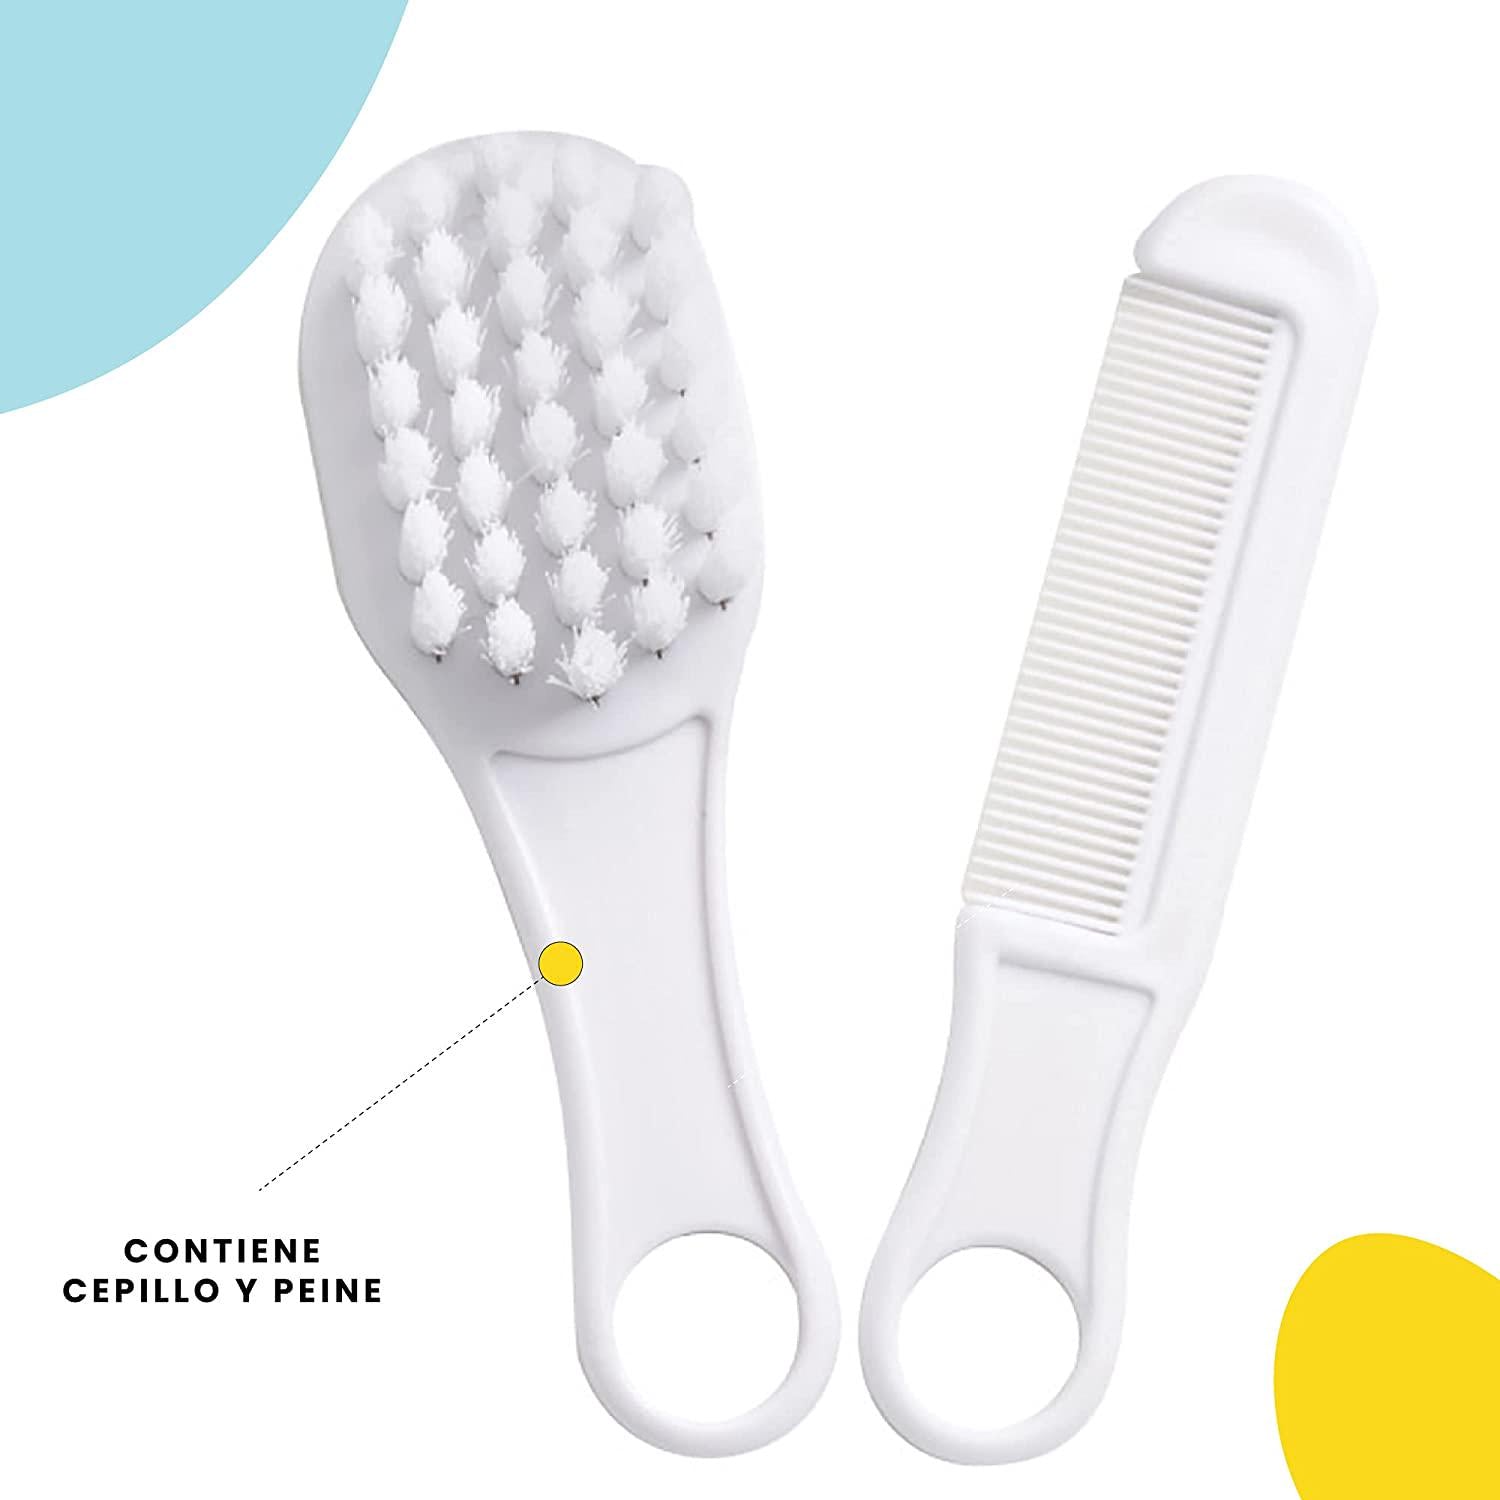 Safety 1st, Safety 1st Baby 1st Brush and Comb